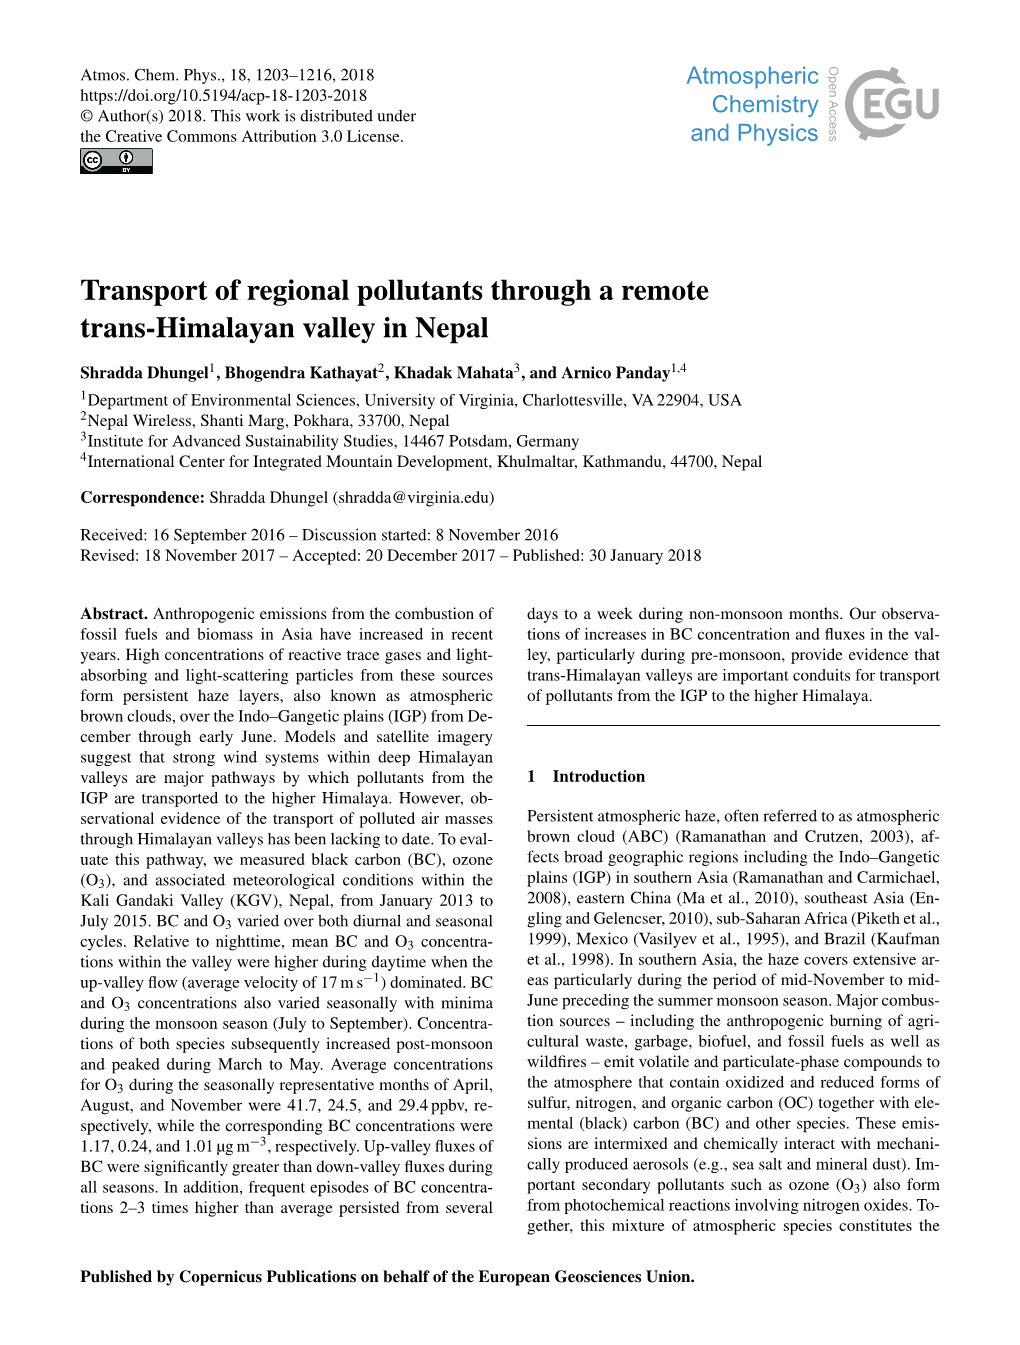 Transport of Regional Pollutants Through a Remote Trans-Himalayan Valley in Nepal